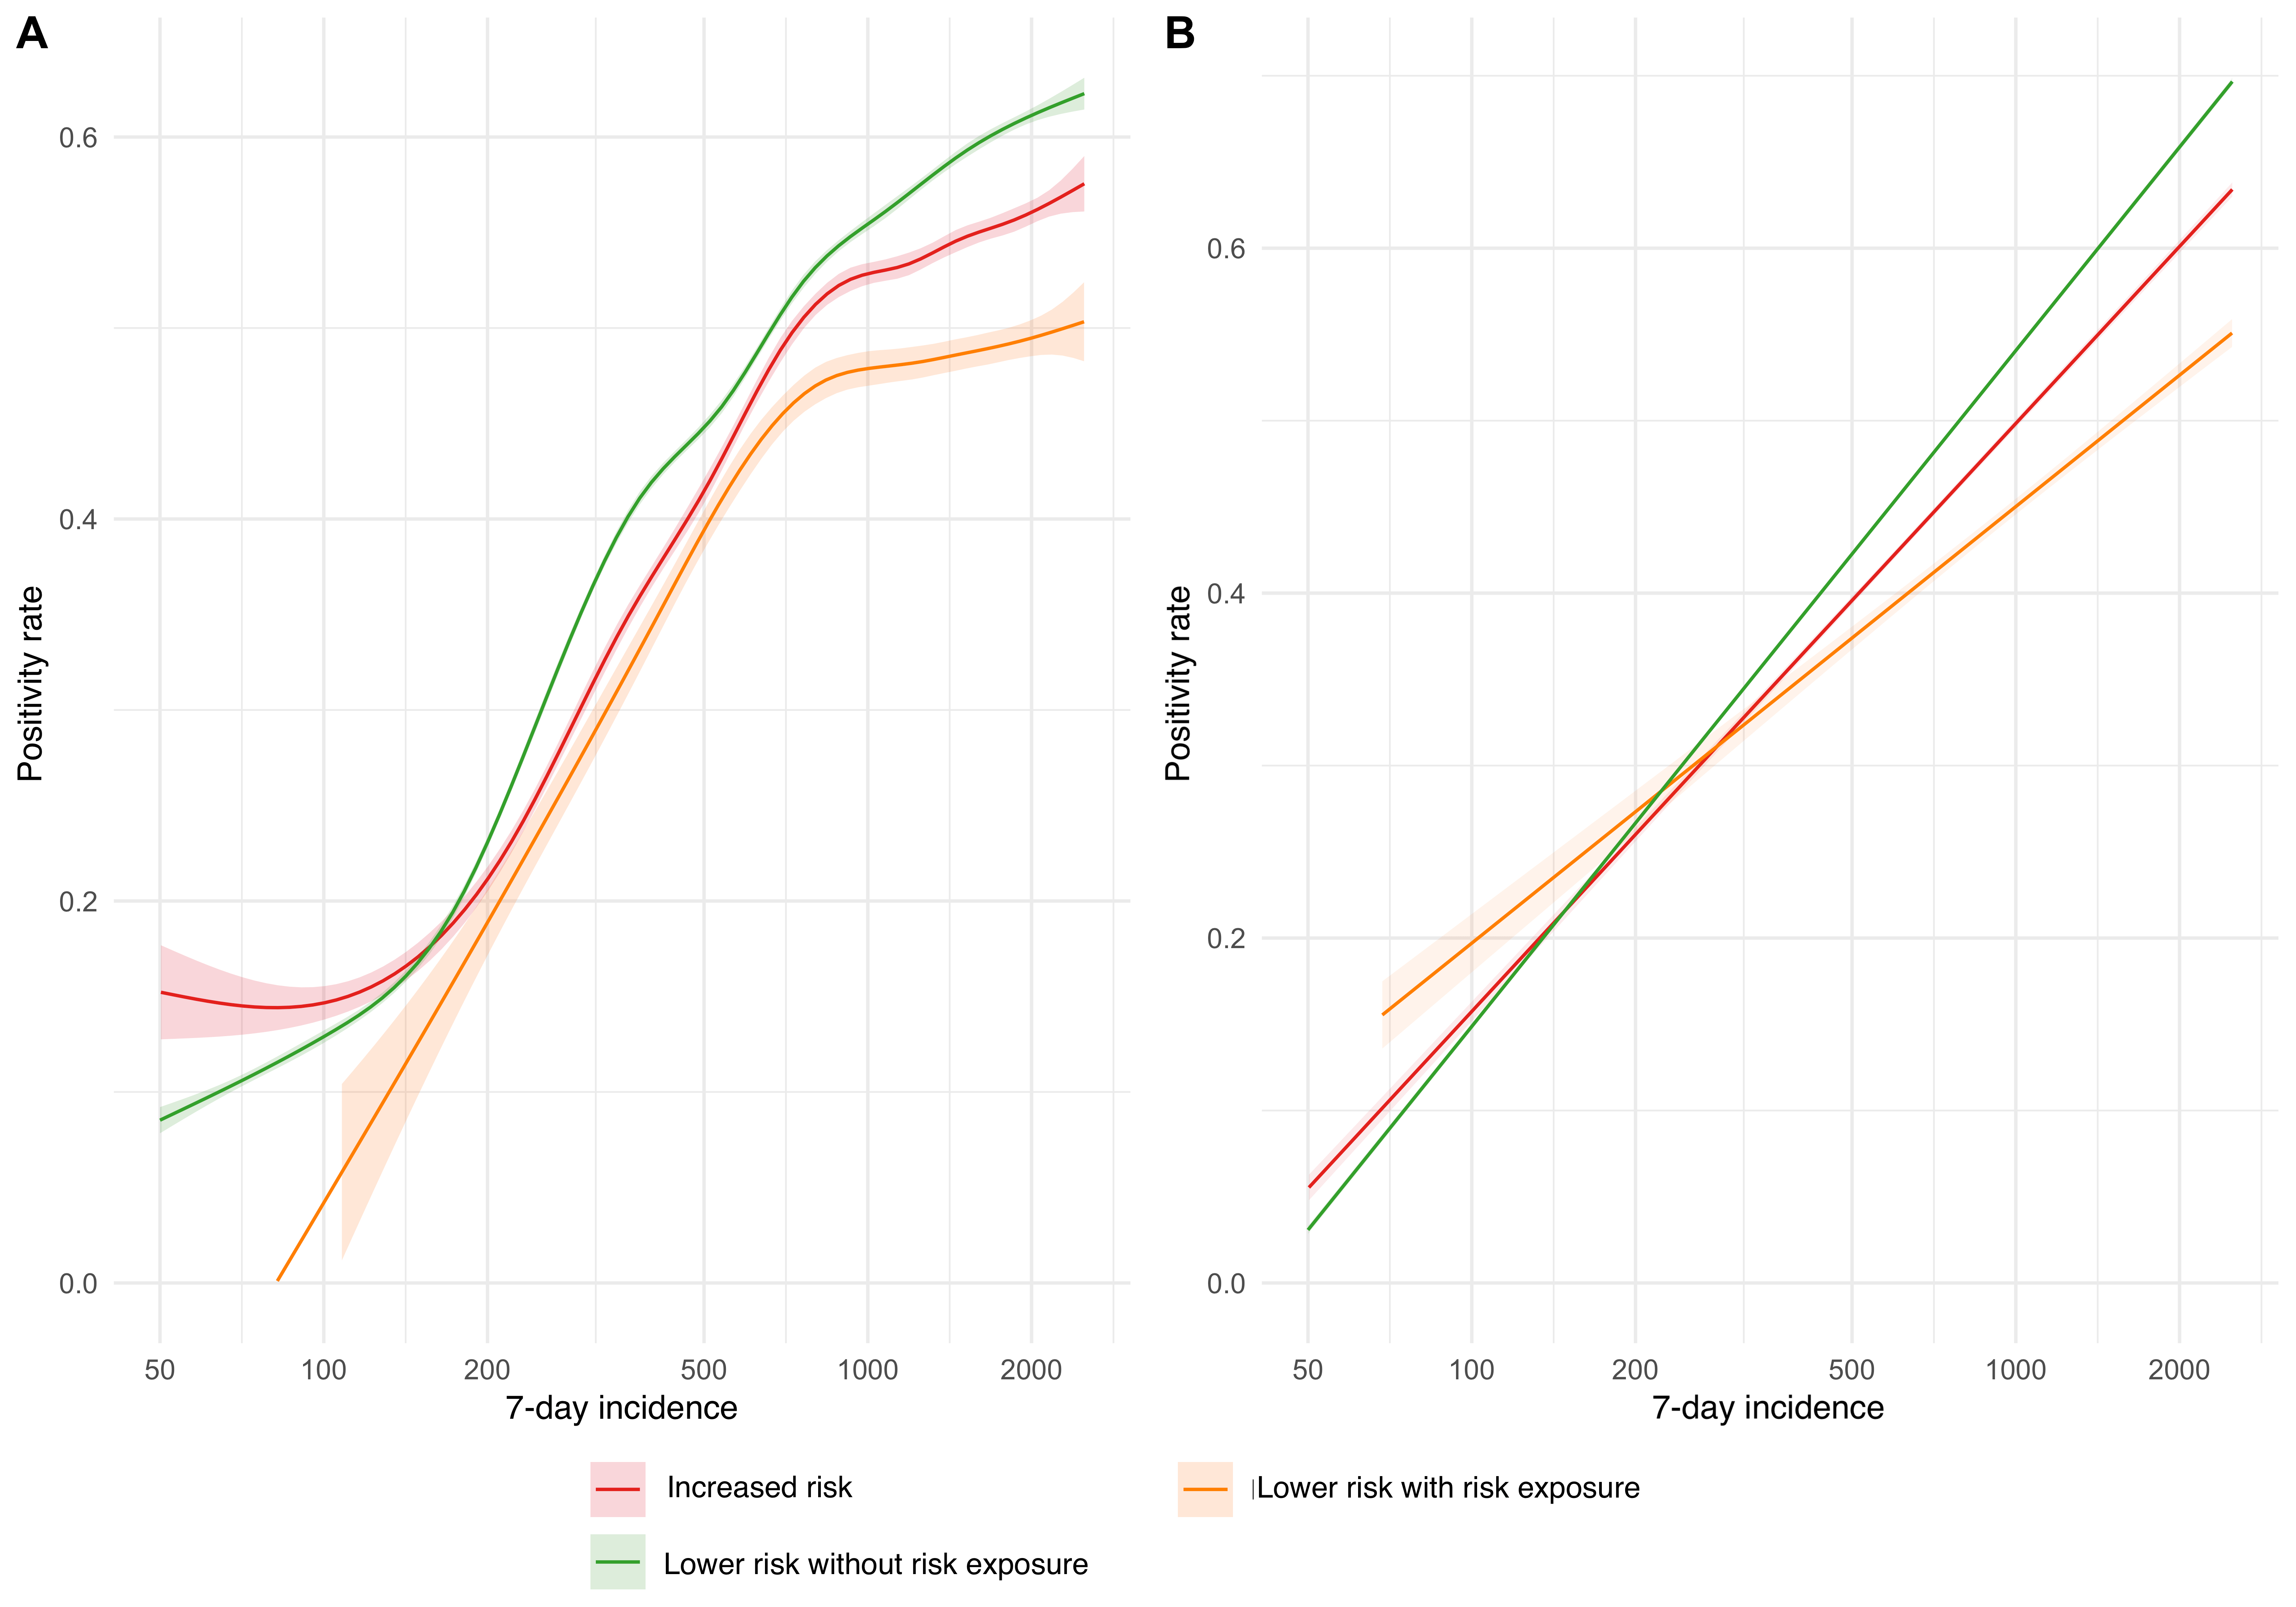 Figure 16: Relationship between local 7-day incidence and positivity rate after risk notification, smoothed and with confidence interval, in (A) nonlinear and (B) linear approximation (PCR).